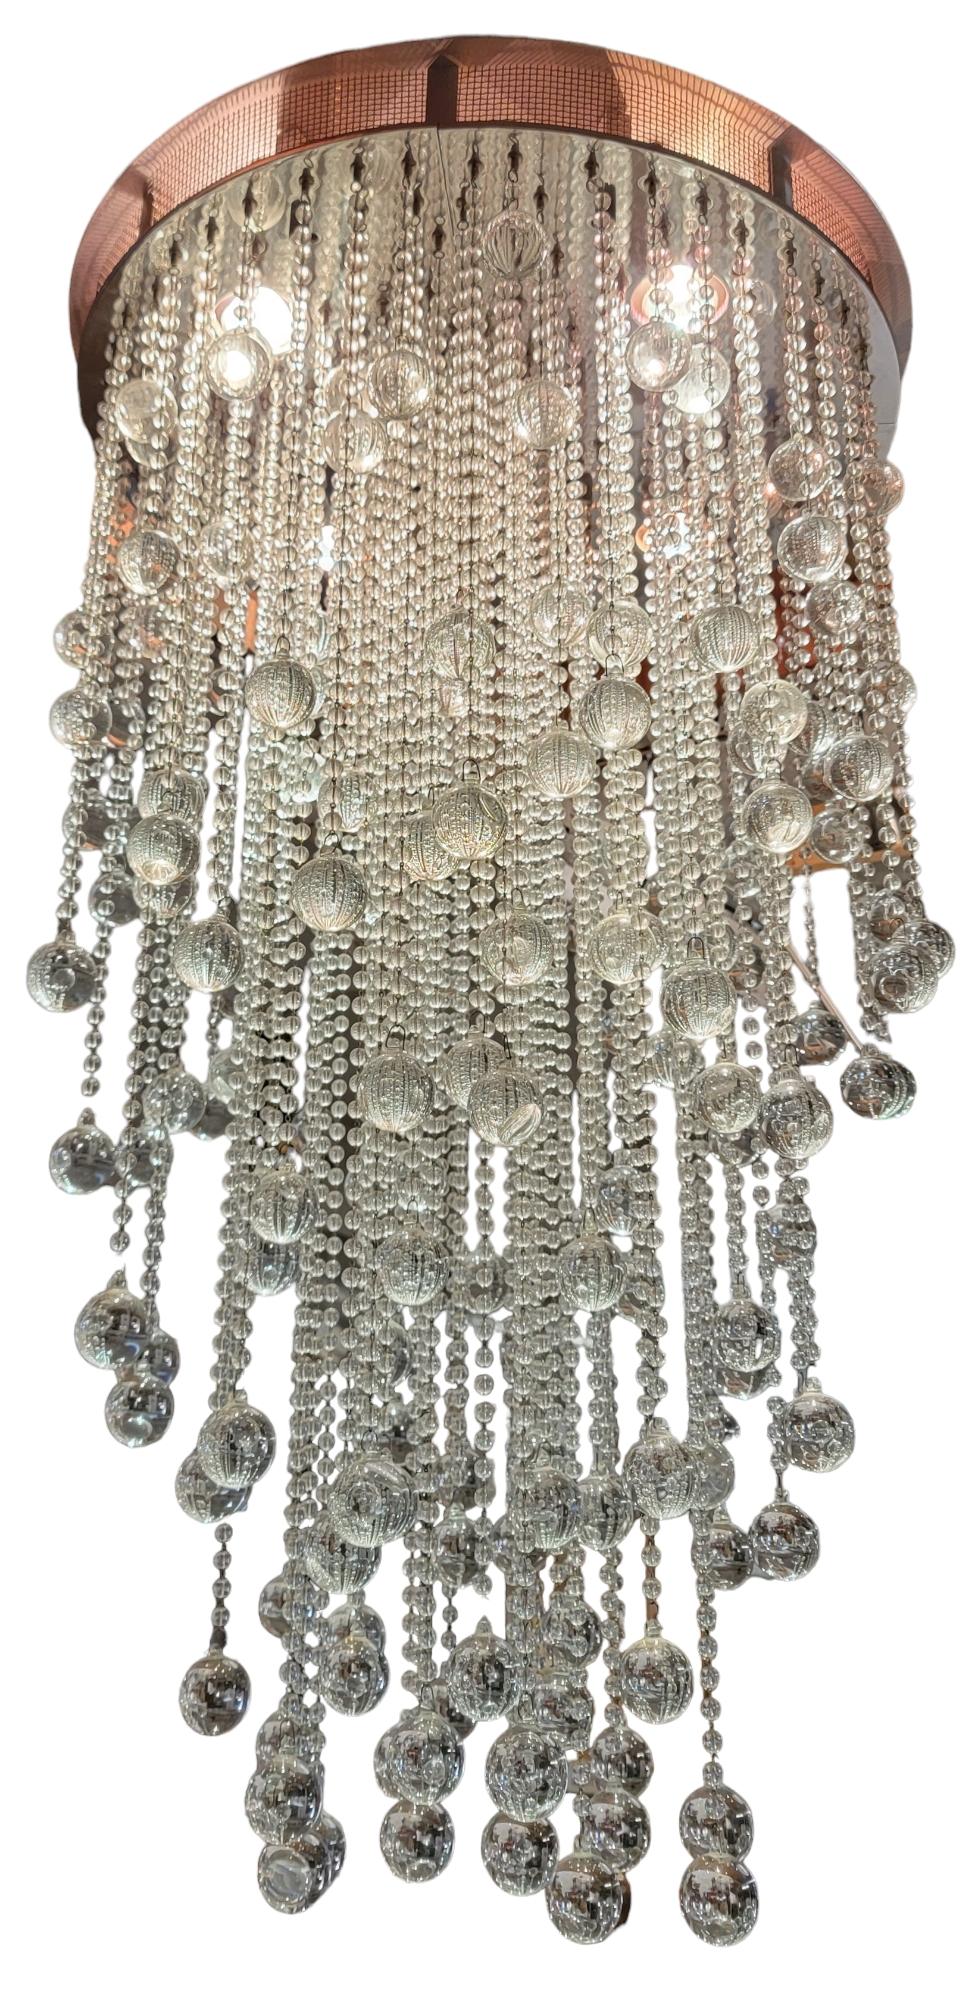 Stunning Todd Rugee Large chandelier. The lights are  LED lights within the frame that shin down on the hanging beads Each Bead has one larger crystal ball at the bottom The Frame us made chrome that adds a depth to the sconces. The bead have a